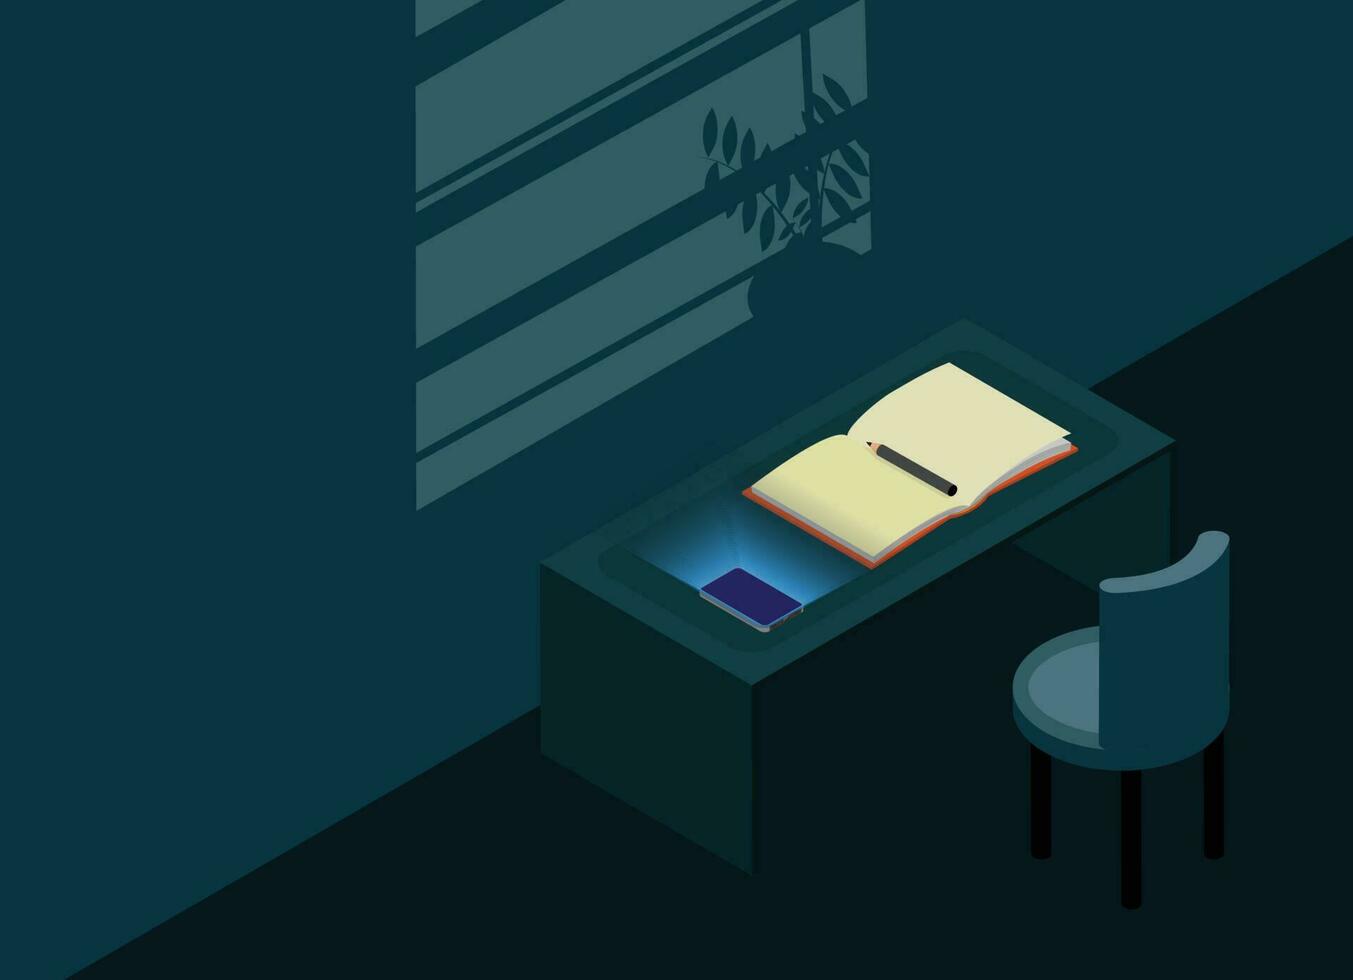 Study Table Room at Night vector